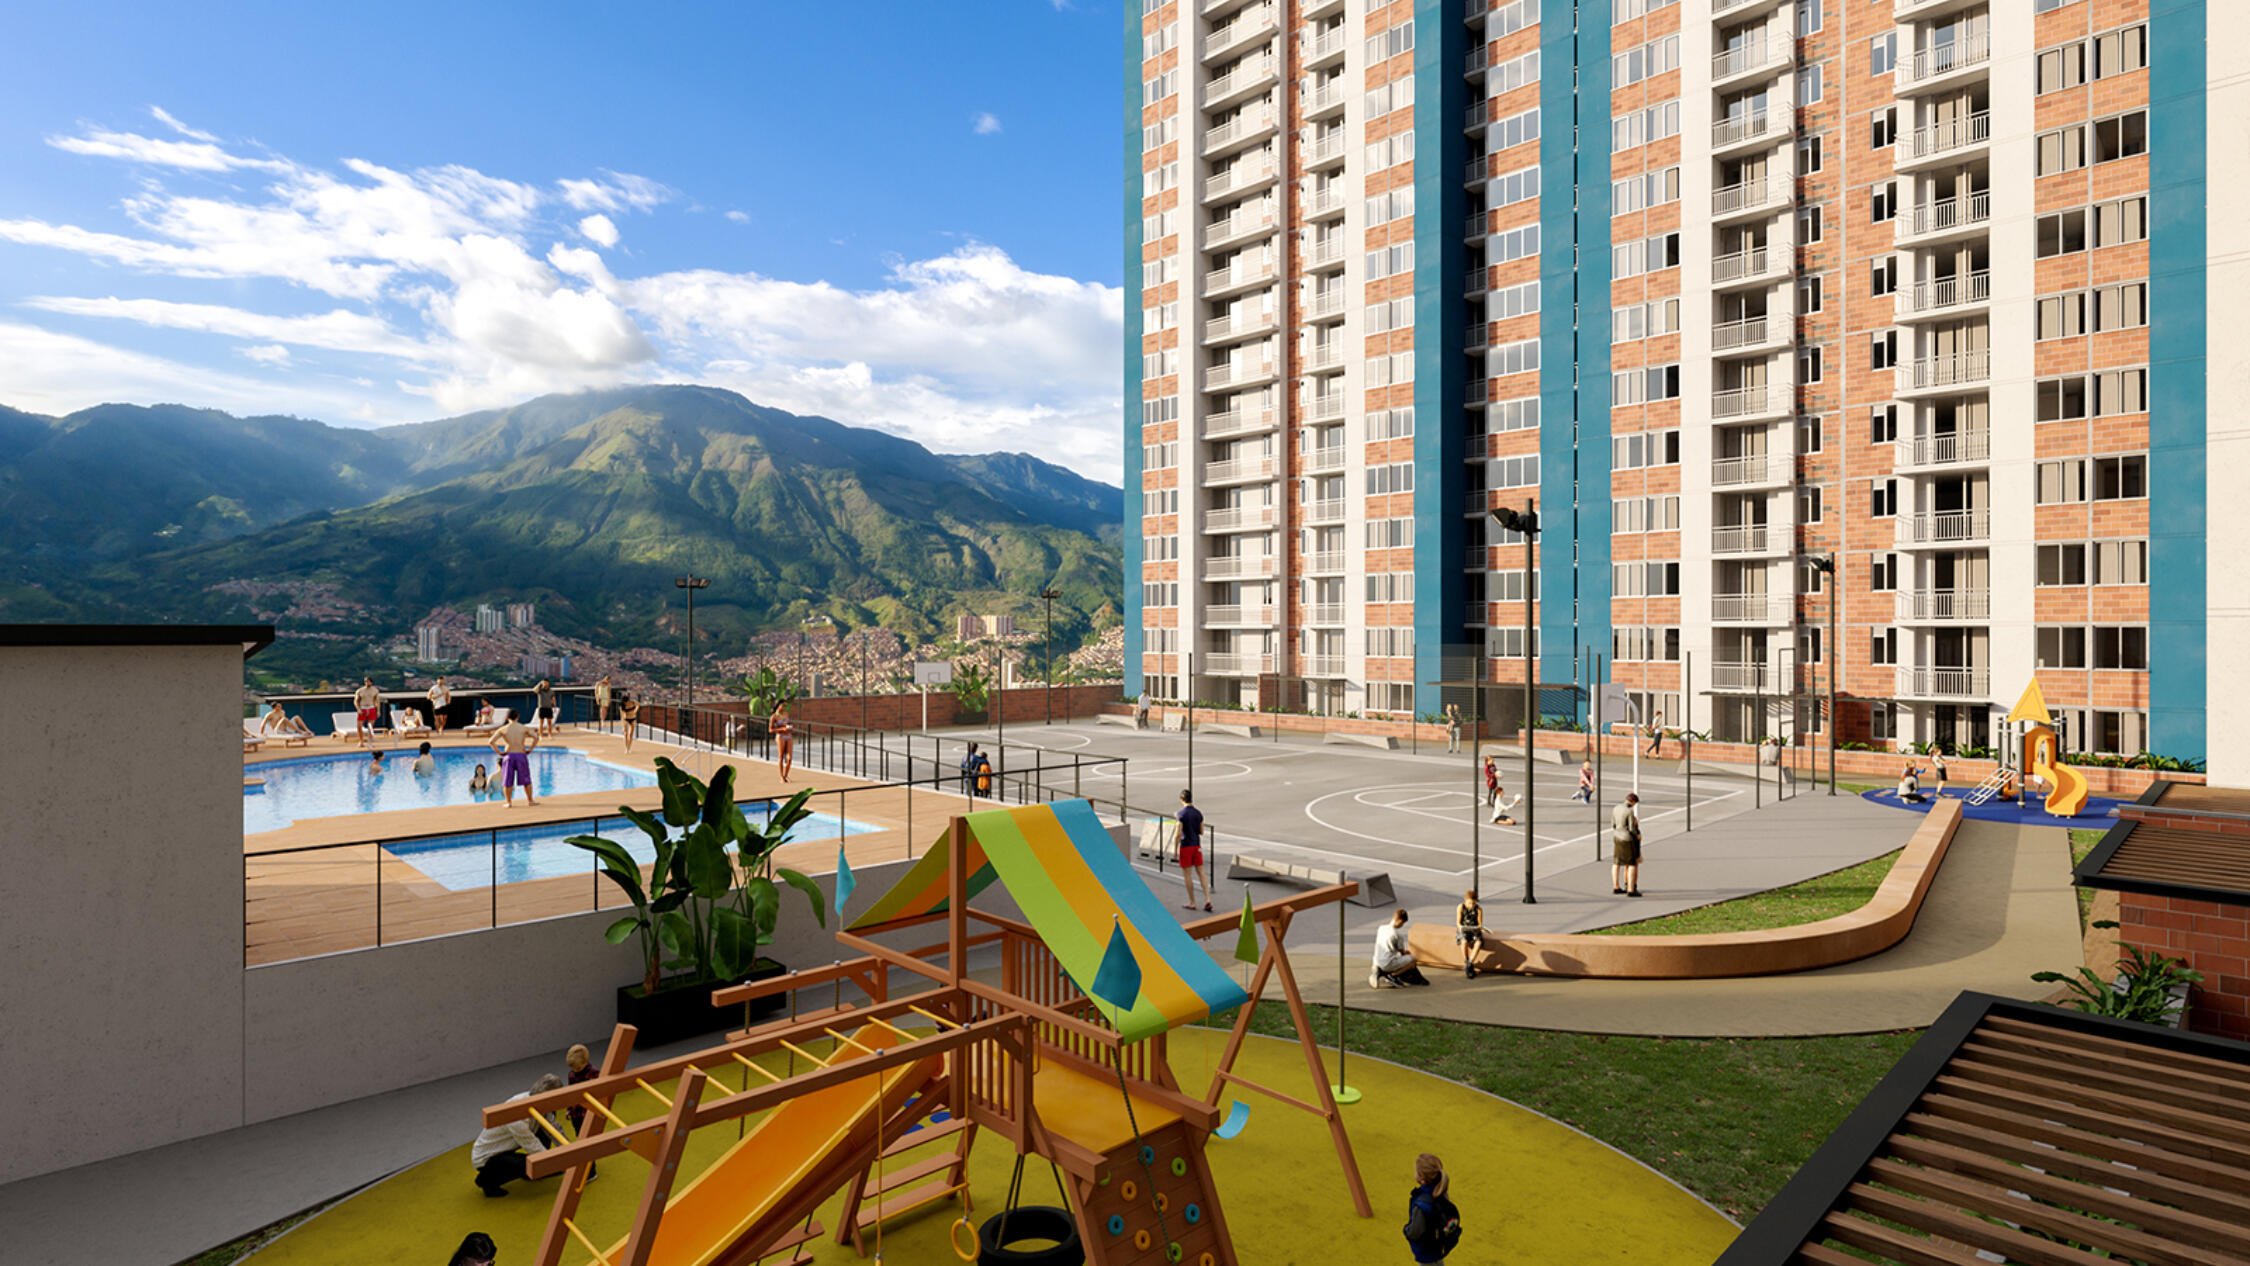 Rendering of apartment building with pool and playground in foreground and mountains and blue sky in background